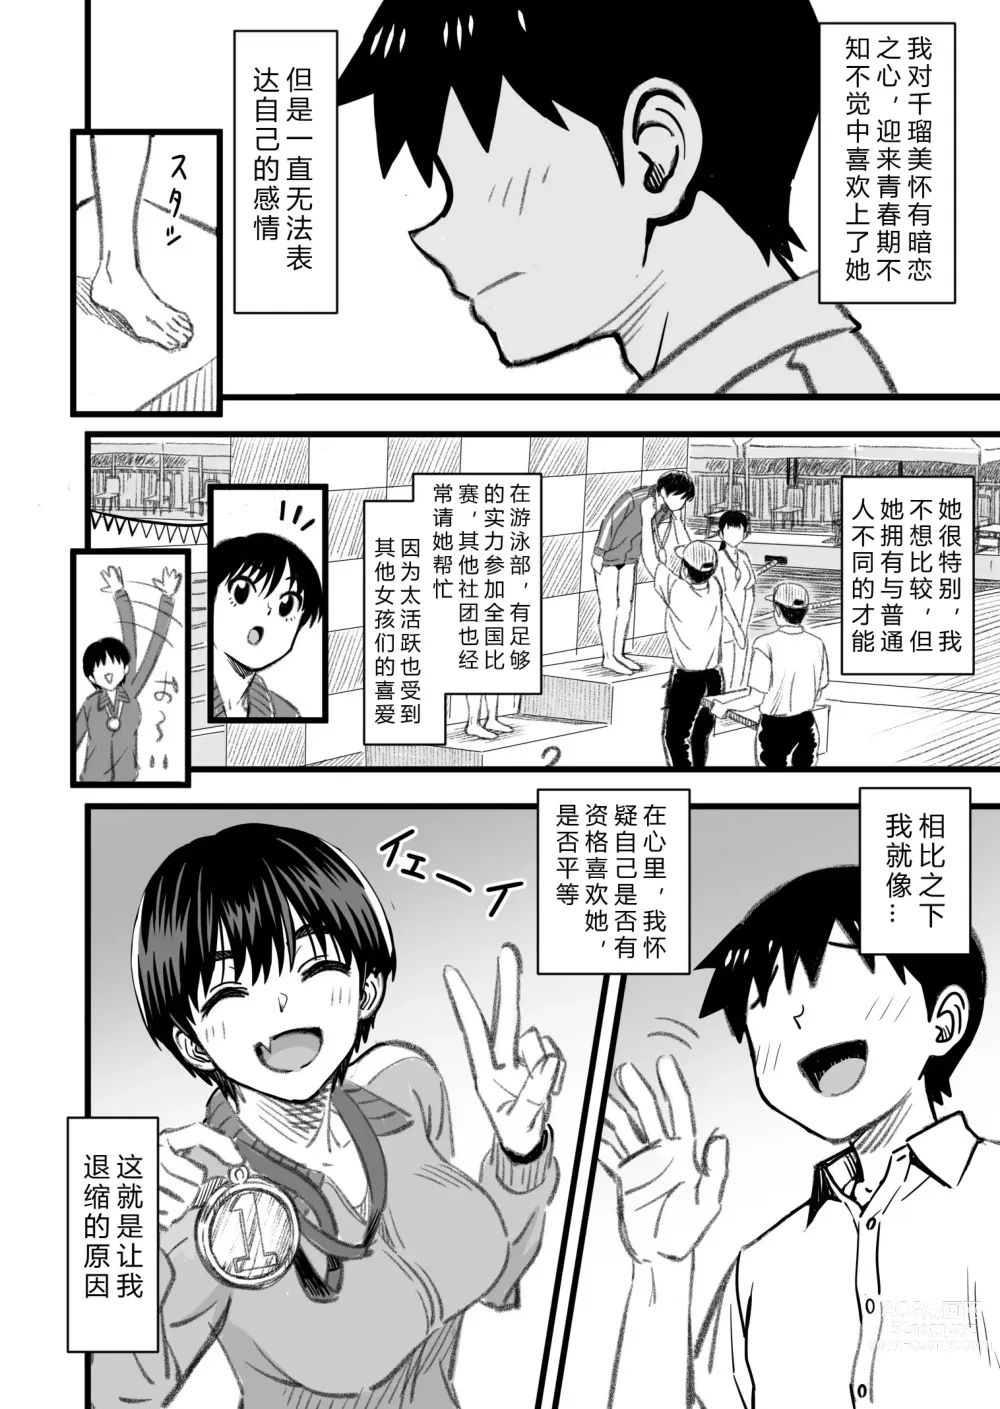 Page 8 of doujinshi How will the Protagonist's Brain be destroyed?